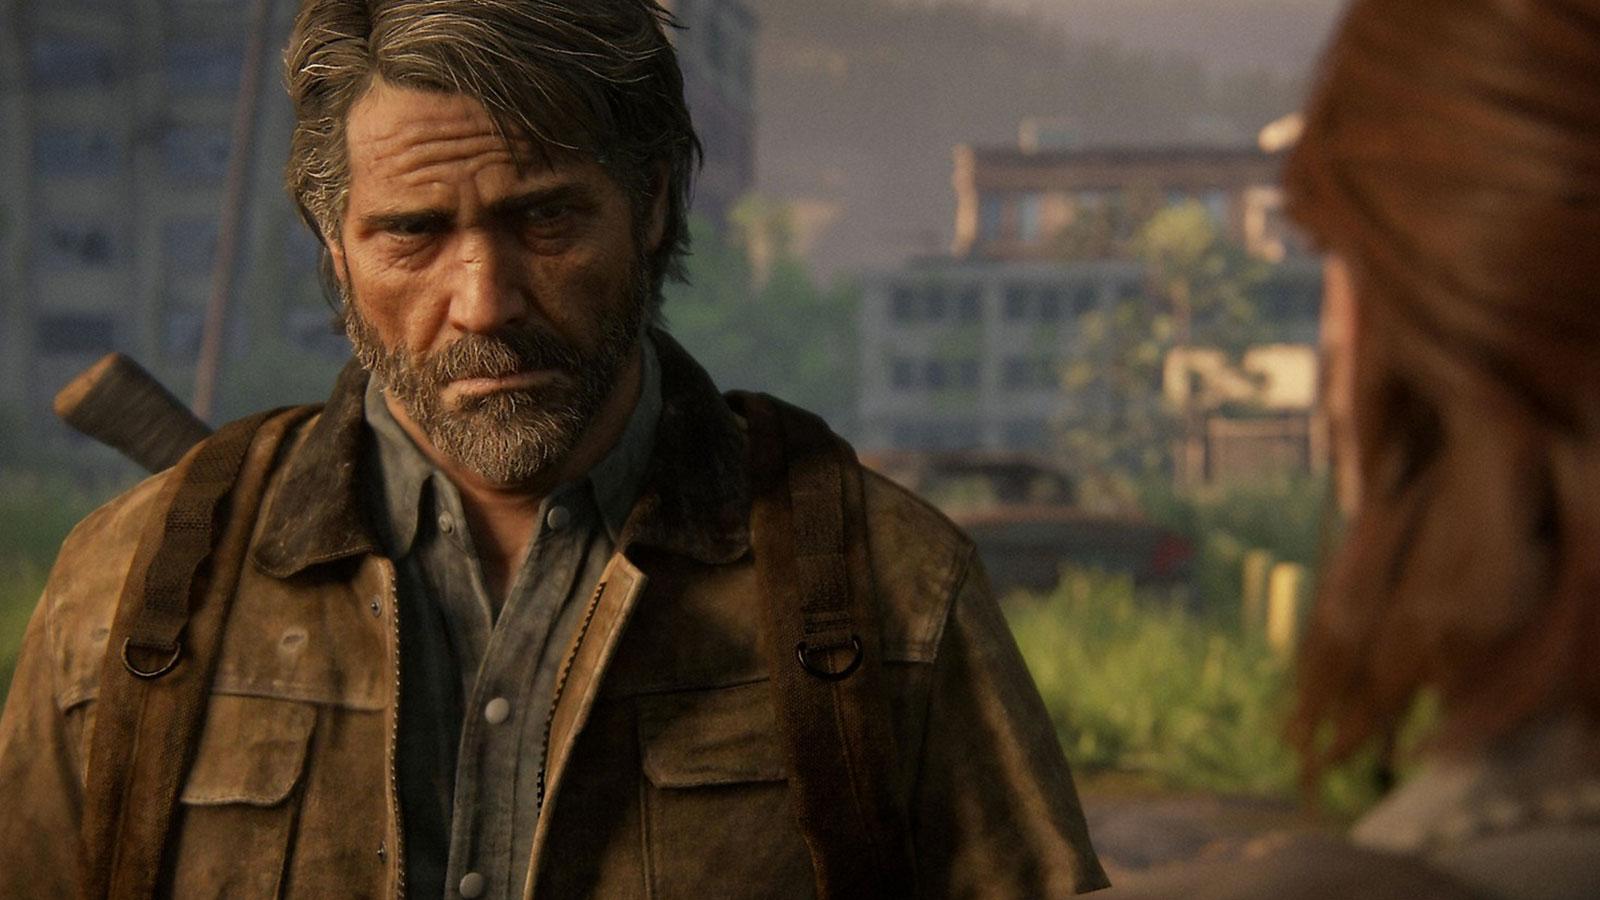 Download Survive the New World with Joel, in The Last of Us Wallpaper